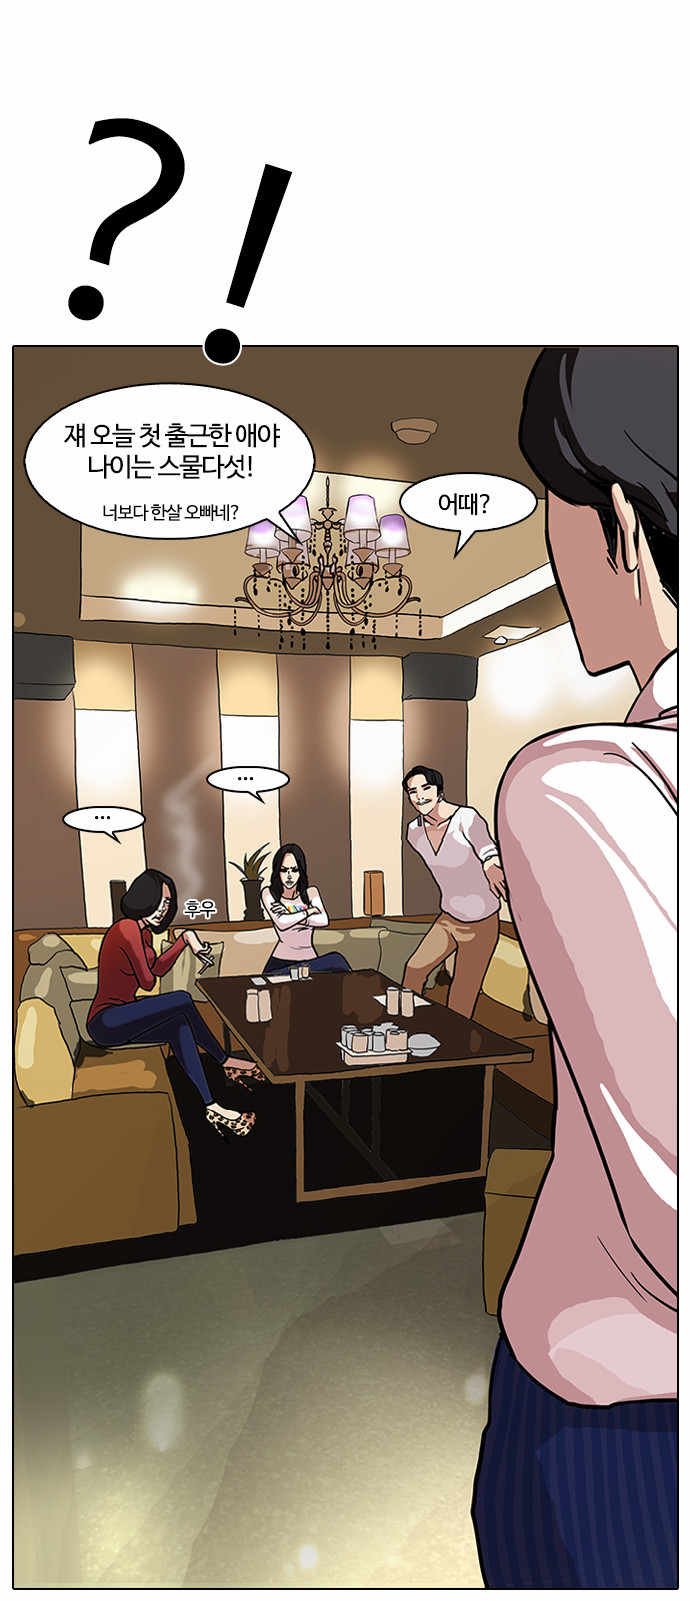 Lookism - Chapter 76 - Page 2